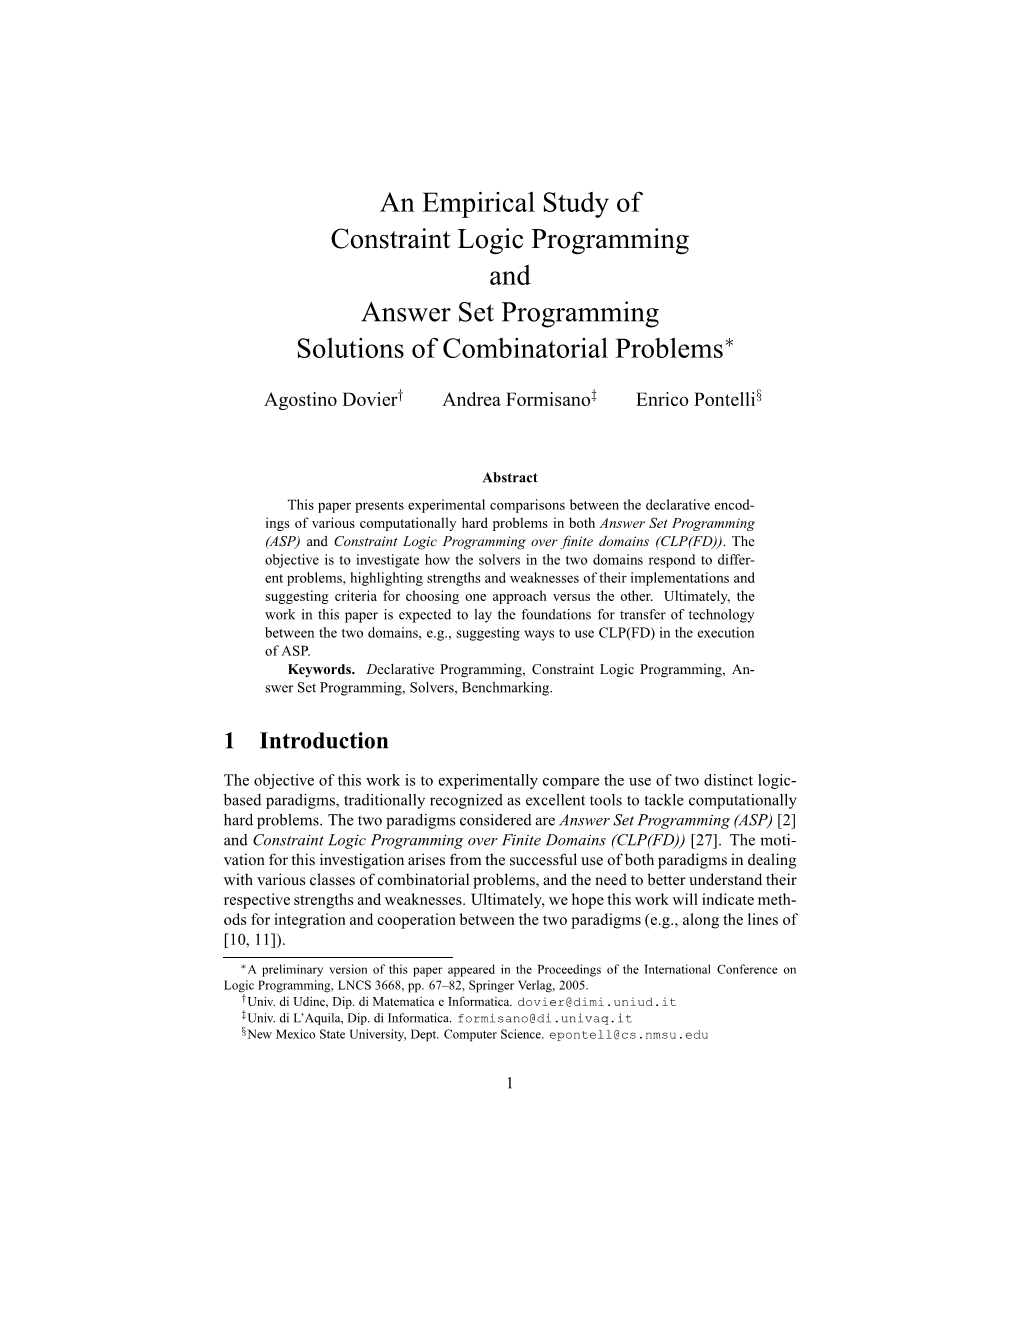 An Empirical Study of Constraint Logic Programming and Answer Set Programming Solutions of Combinatorial Problems∗